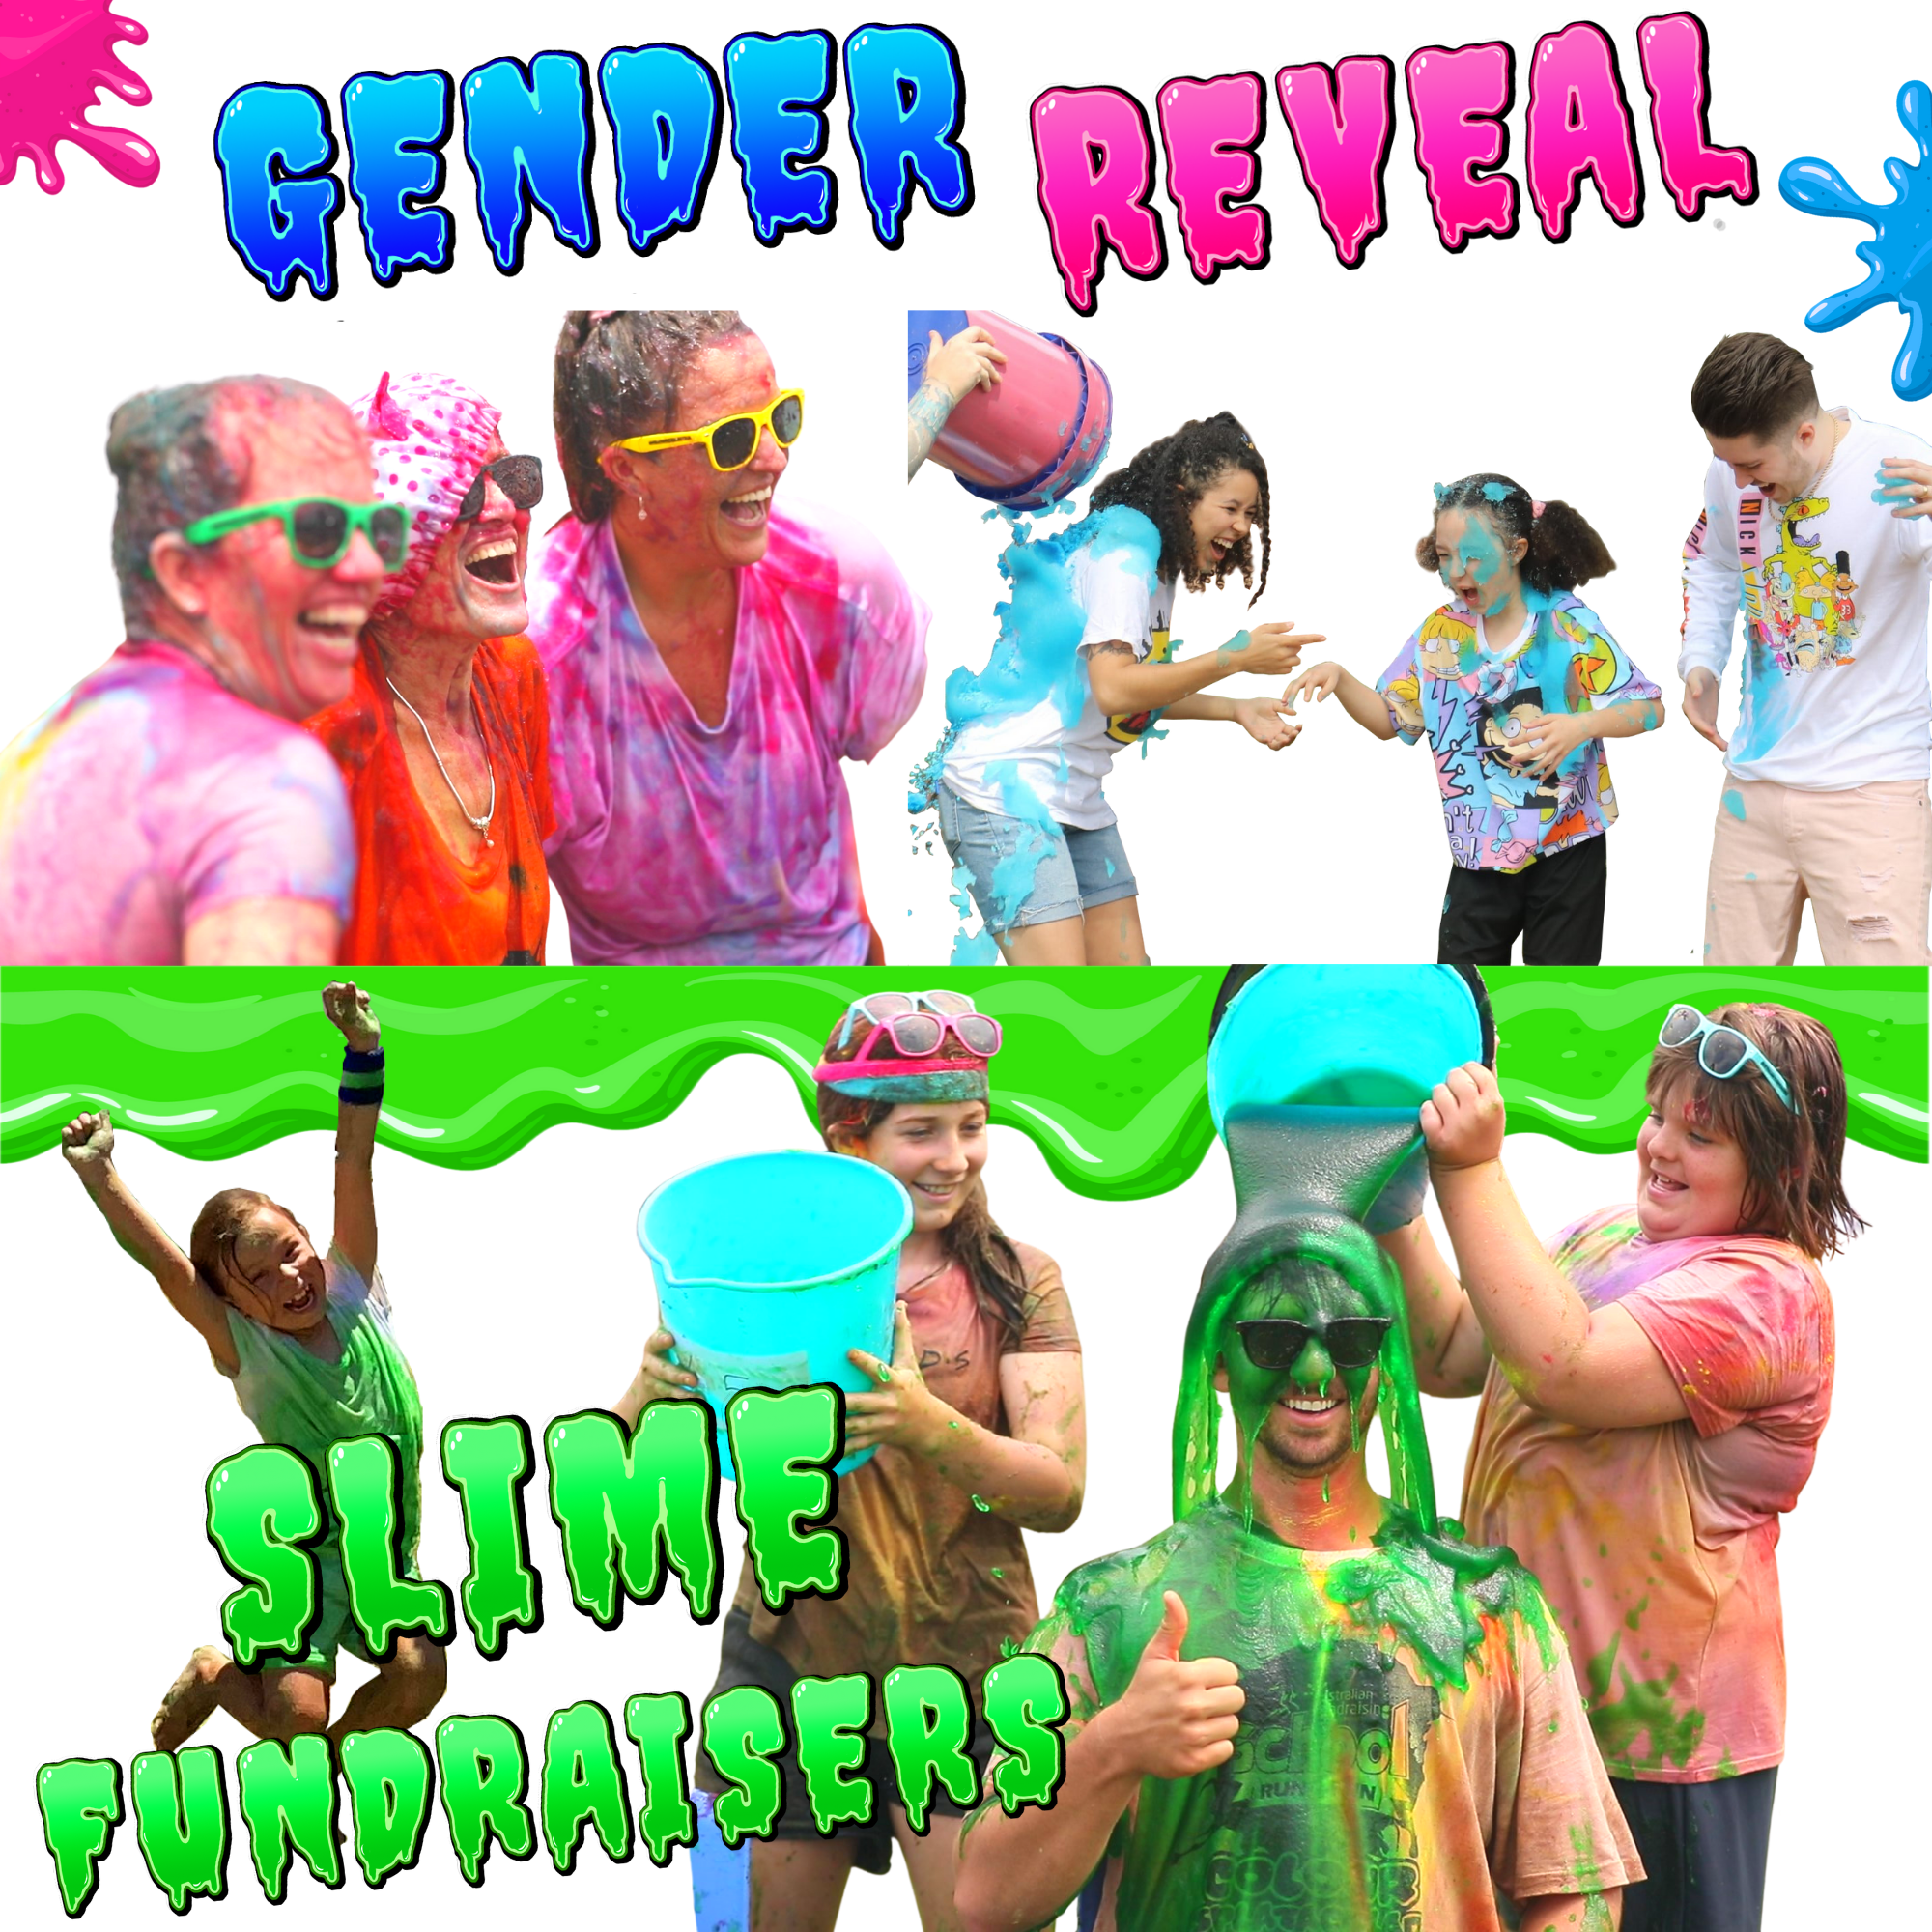  Bulk Instant Slime Powder! Mix with Water to Make a Huge 40  Gallons of Slime! 4 Colors for Slime Bucket Challenges, Color Run, Blaster  Gun, Bath Slime. Get Slimed in Blue